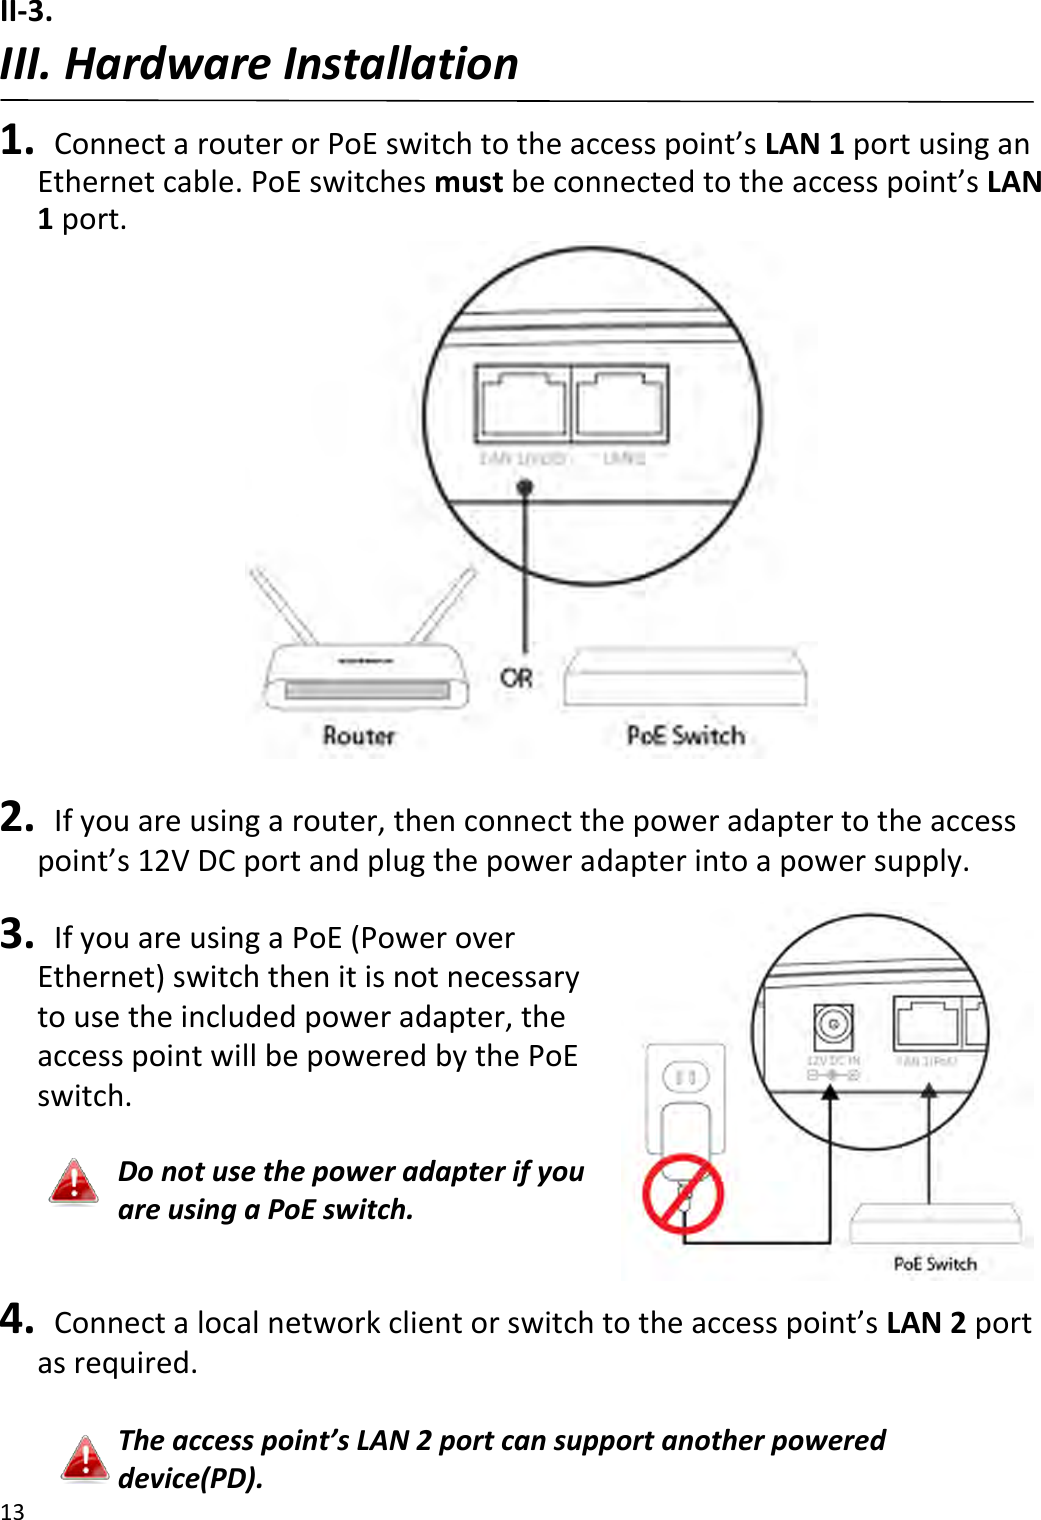 13  II-3.     III. Hardware Installation  1.   Connect a router or PoE switch to the access point’s LAN 1 port using an Ethernet cable. PoE switches must be connected to the access point’s LAN 1 port.   2.   If you are using a router, then connect the power adapter to the access point’s 12V DC port and plug the power adapter into a power supply.  3.   If you are using a PoE (Power over Ethernet) switch then it is not necessary to use the included power adapter, the access point will be powered by the PoE switch.  Do not use the power adapter if you are using a PoE switch.  4.  Connect a local network client or switch to the access point’s LAN 2 port as required.  The access point’s LAN 2 port can support another powered device(PD). 